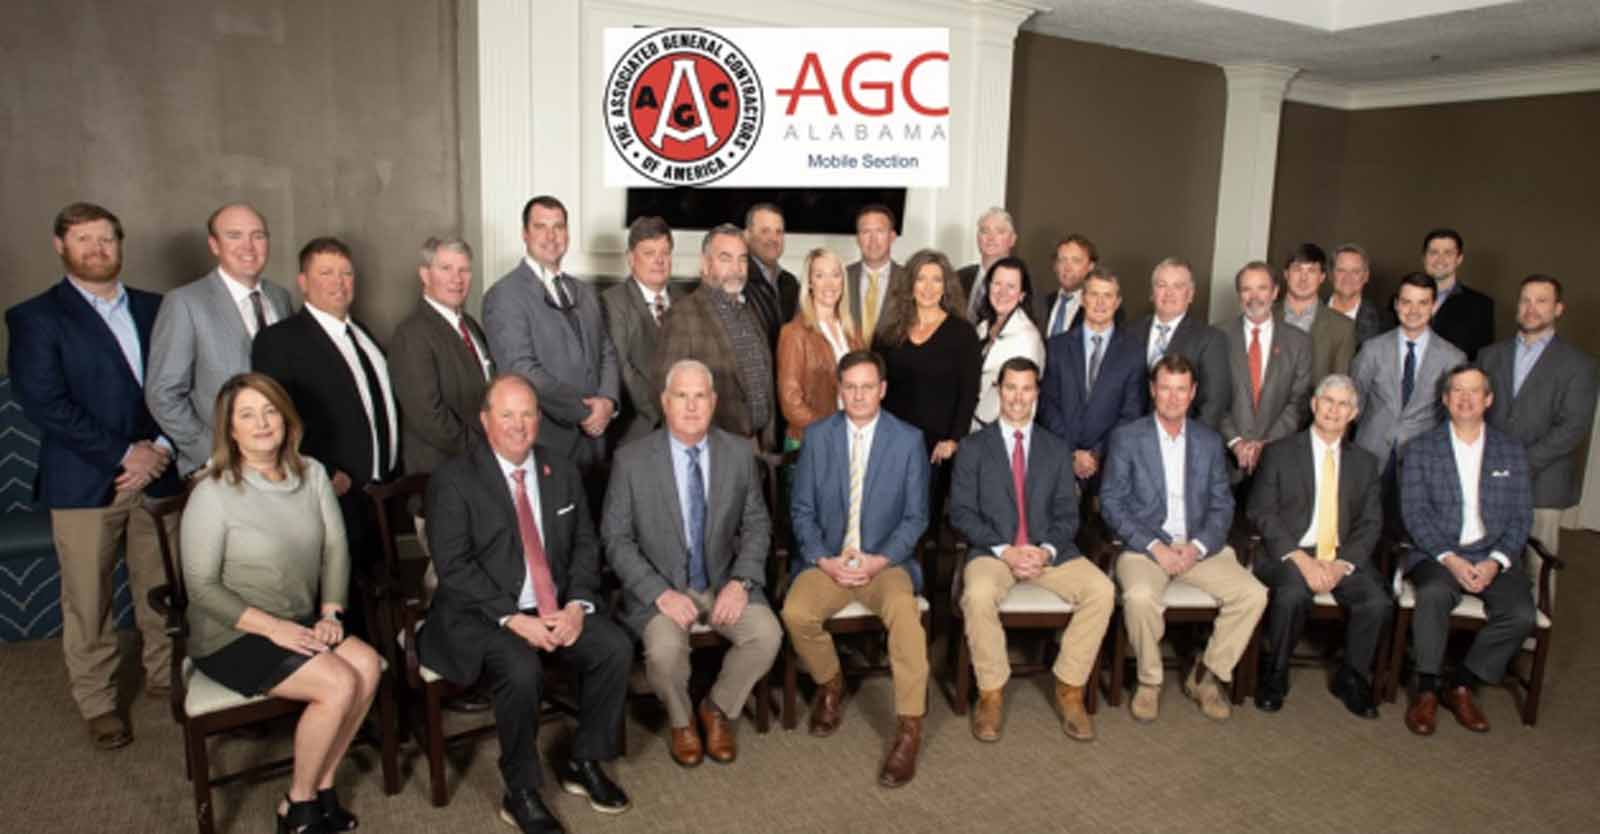 AGC Mobile Section Announces Officers And Directors